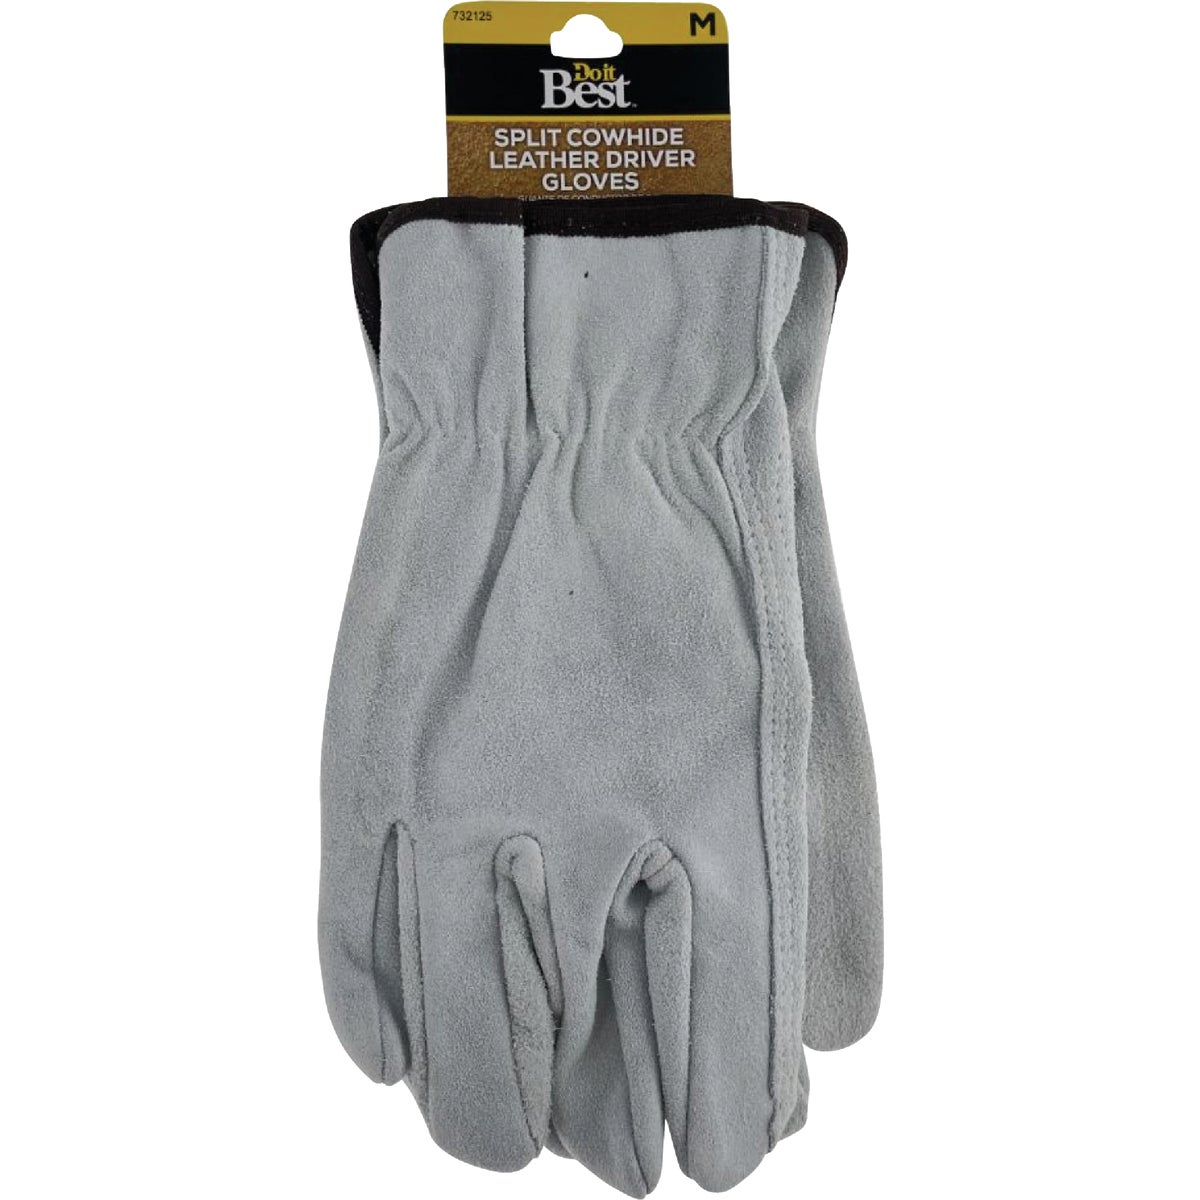 Item 732125, Unlined brushed suede cowhide leather glove with a shirred wrist.